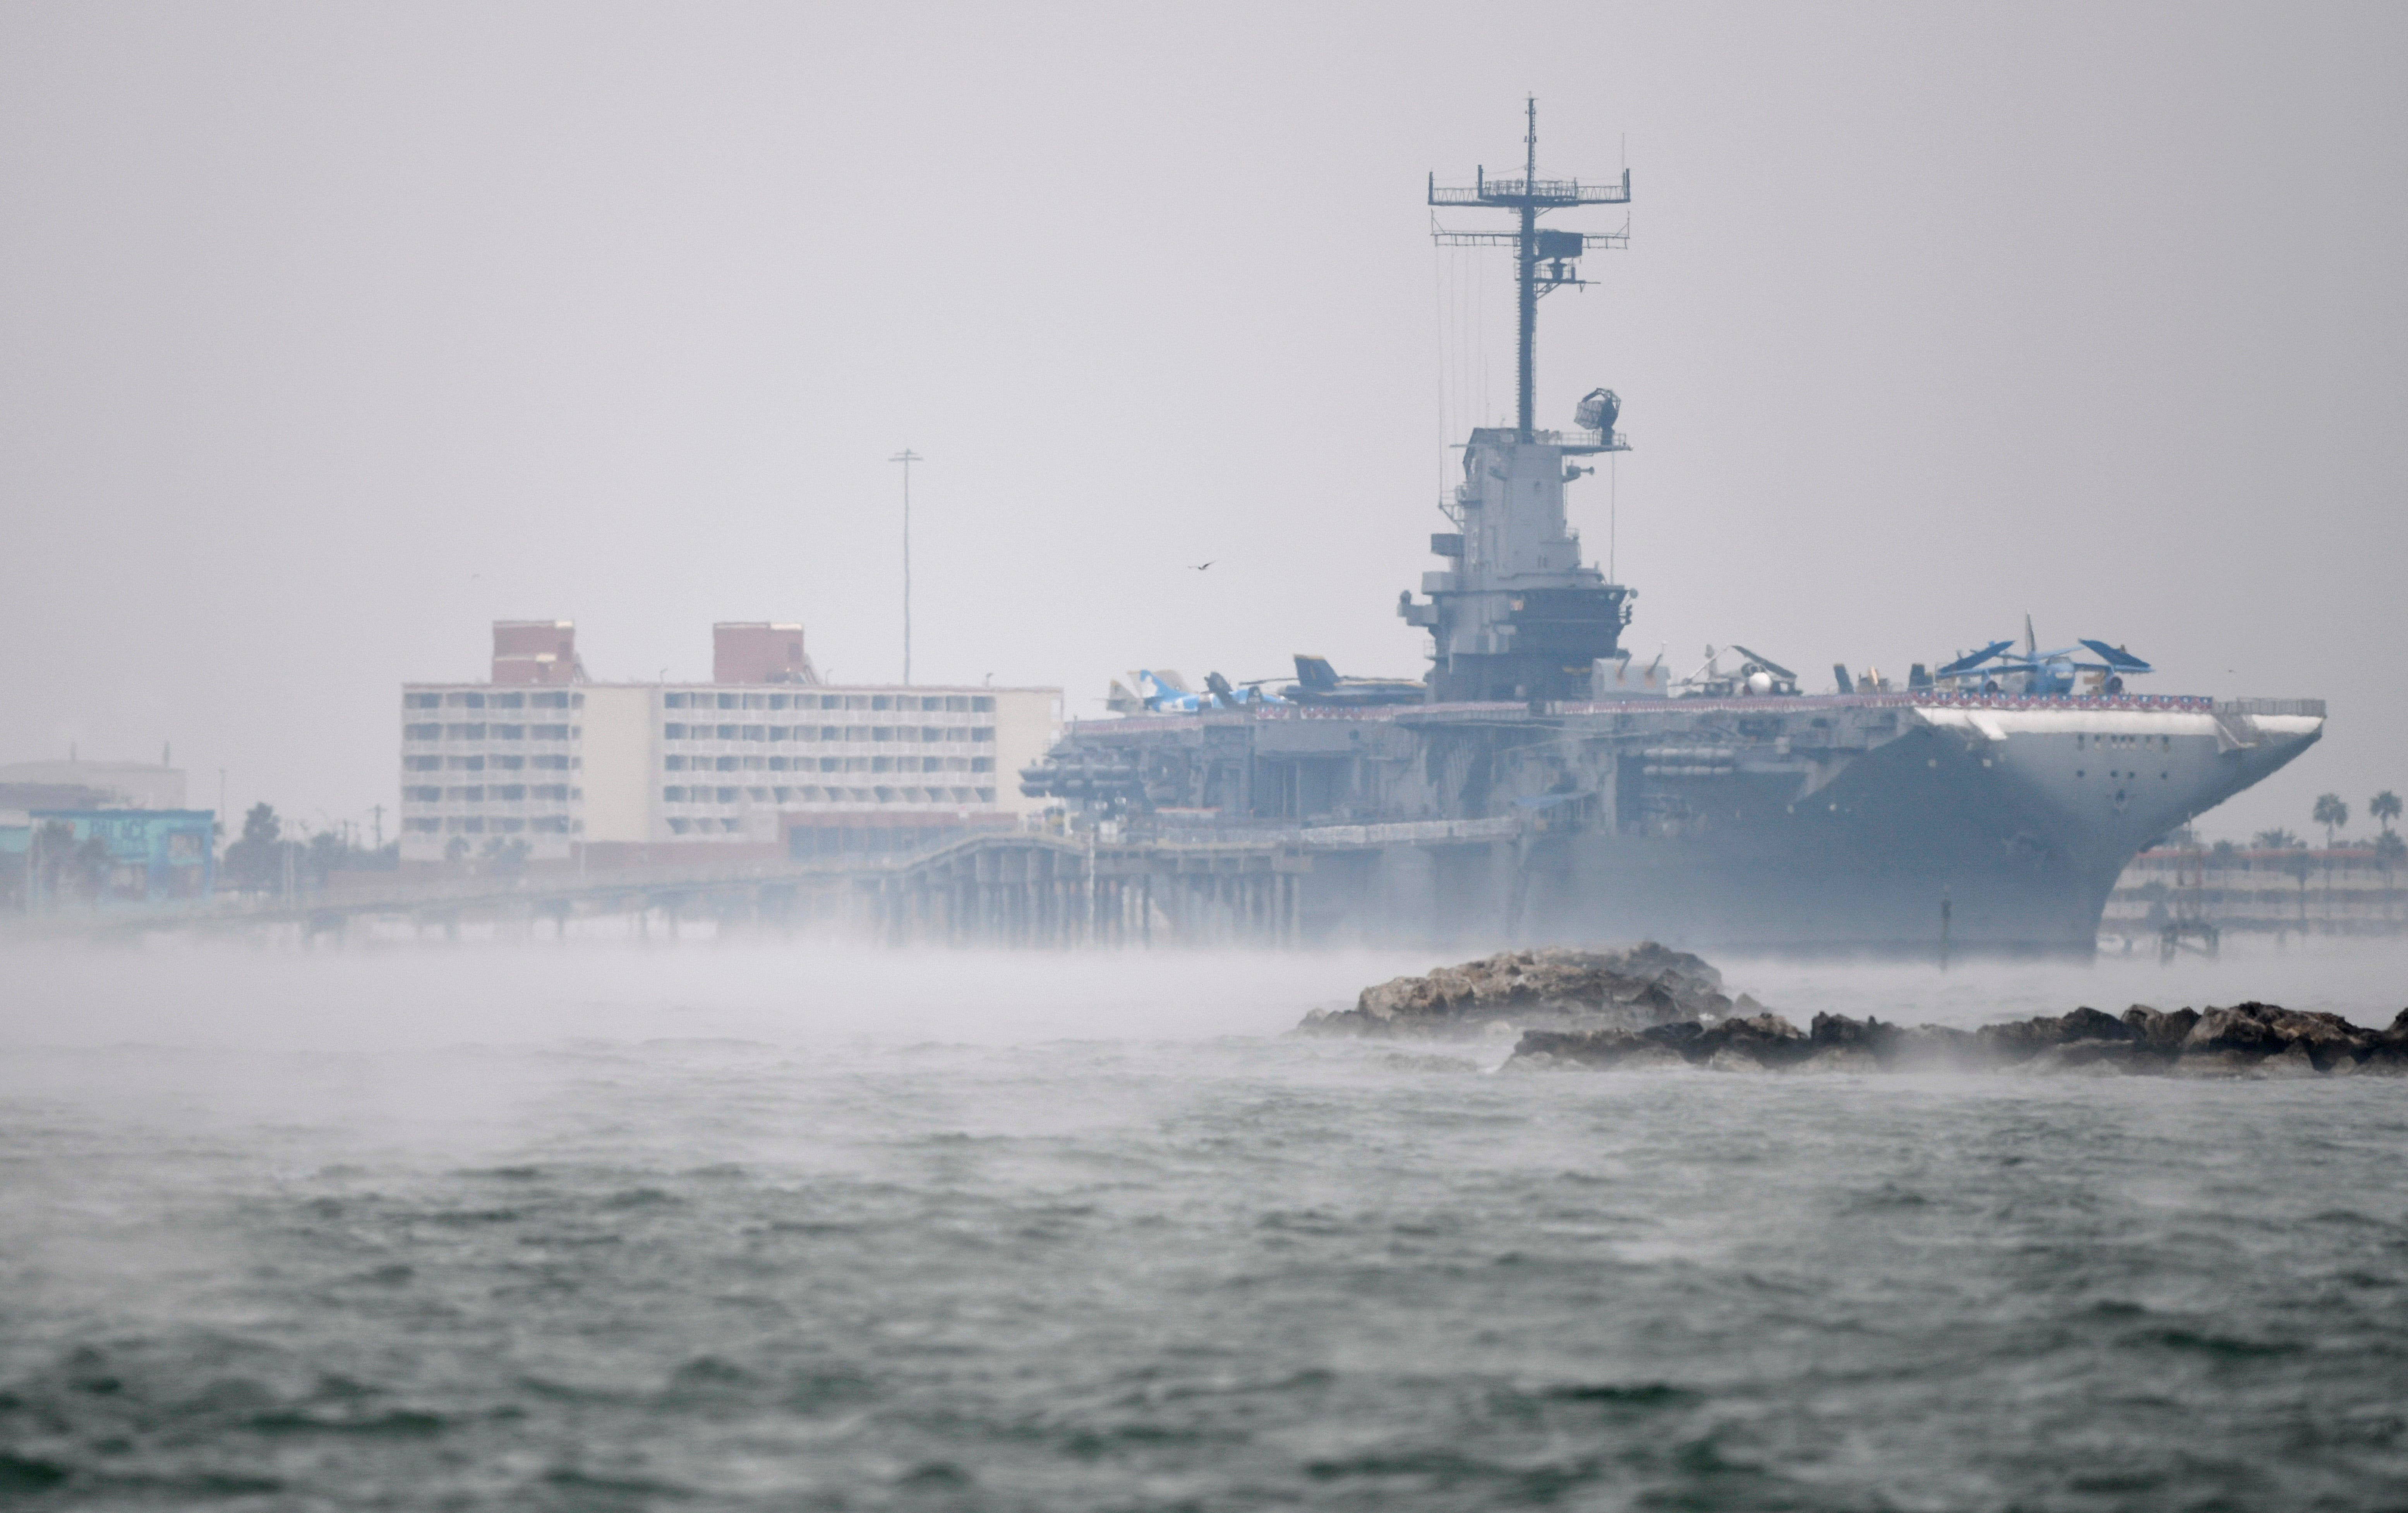 Mist surrounds the USS Lexington ahead of weekend winter weather, Saturday, Feb. 13, 2021. According to the National Weather Service, the winter storm watch is in effect from Feb. 14 until Feb. 15.